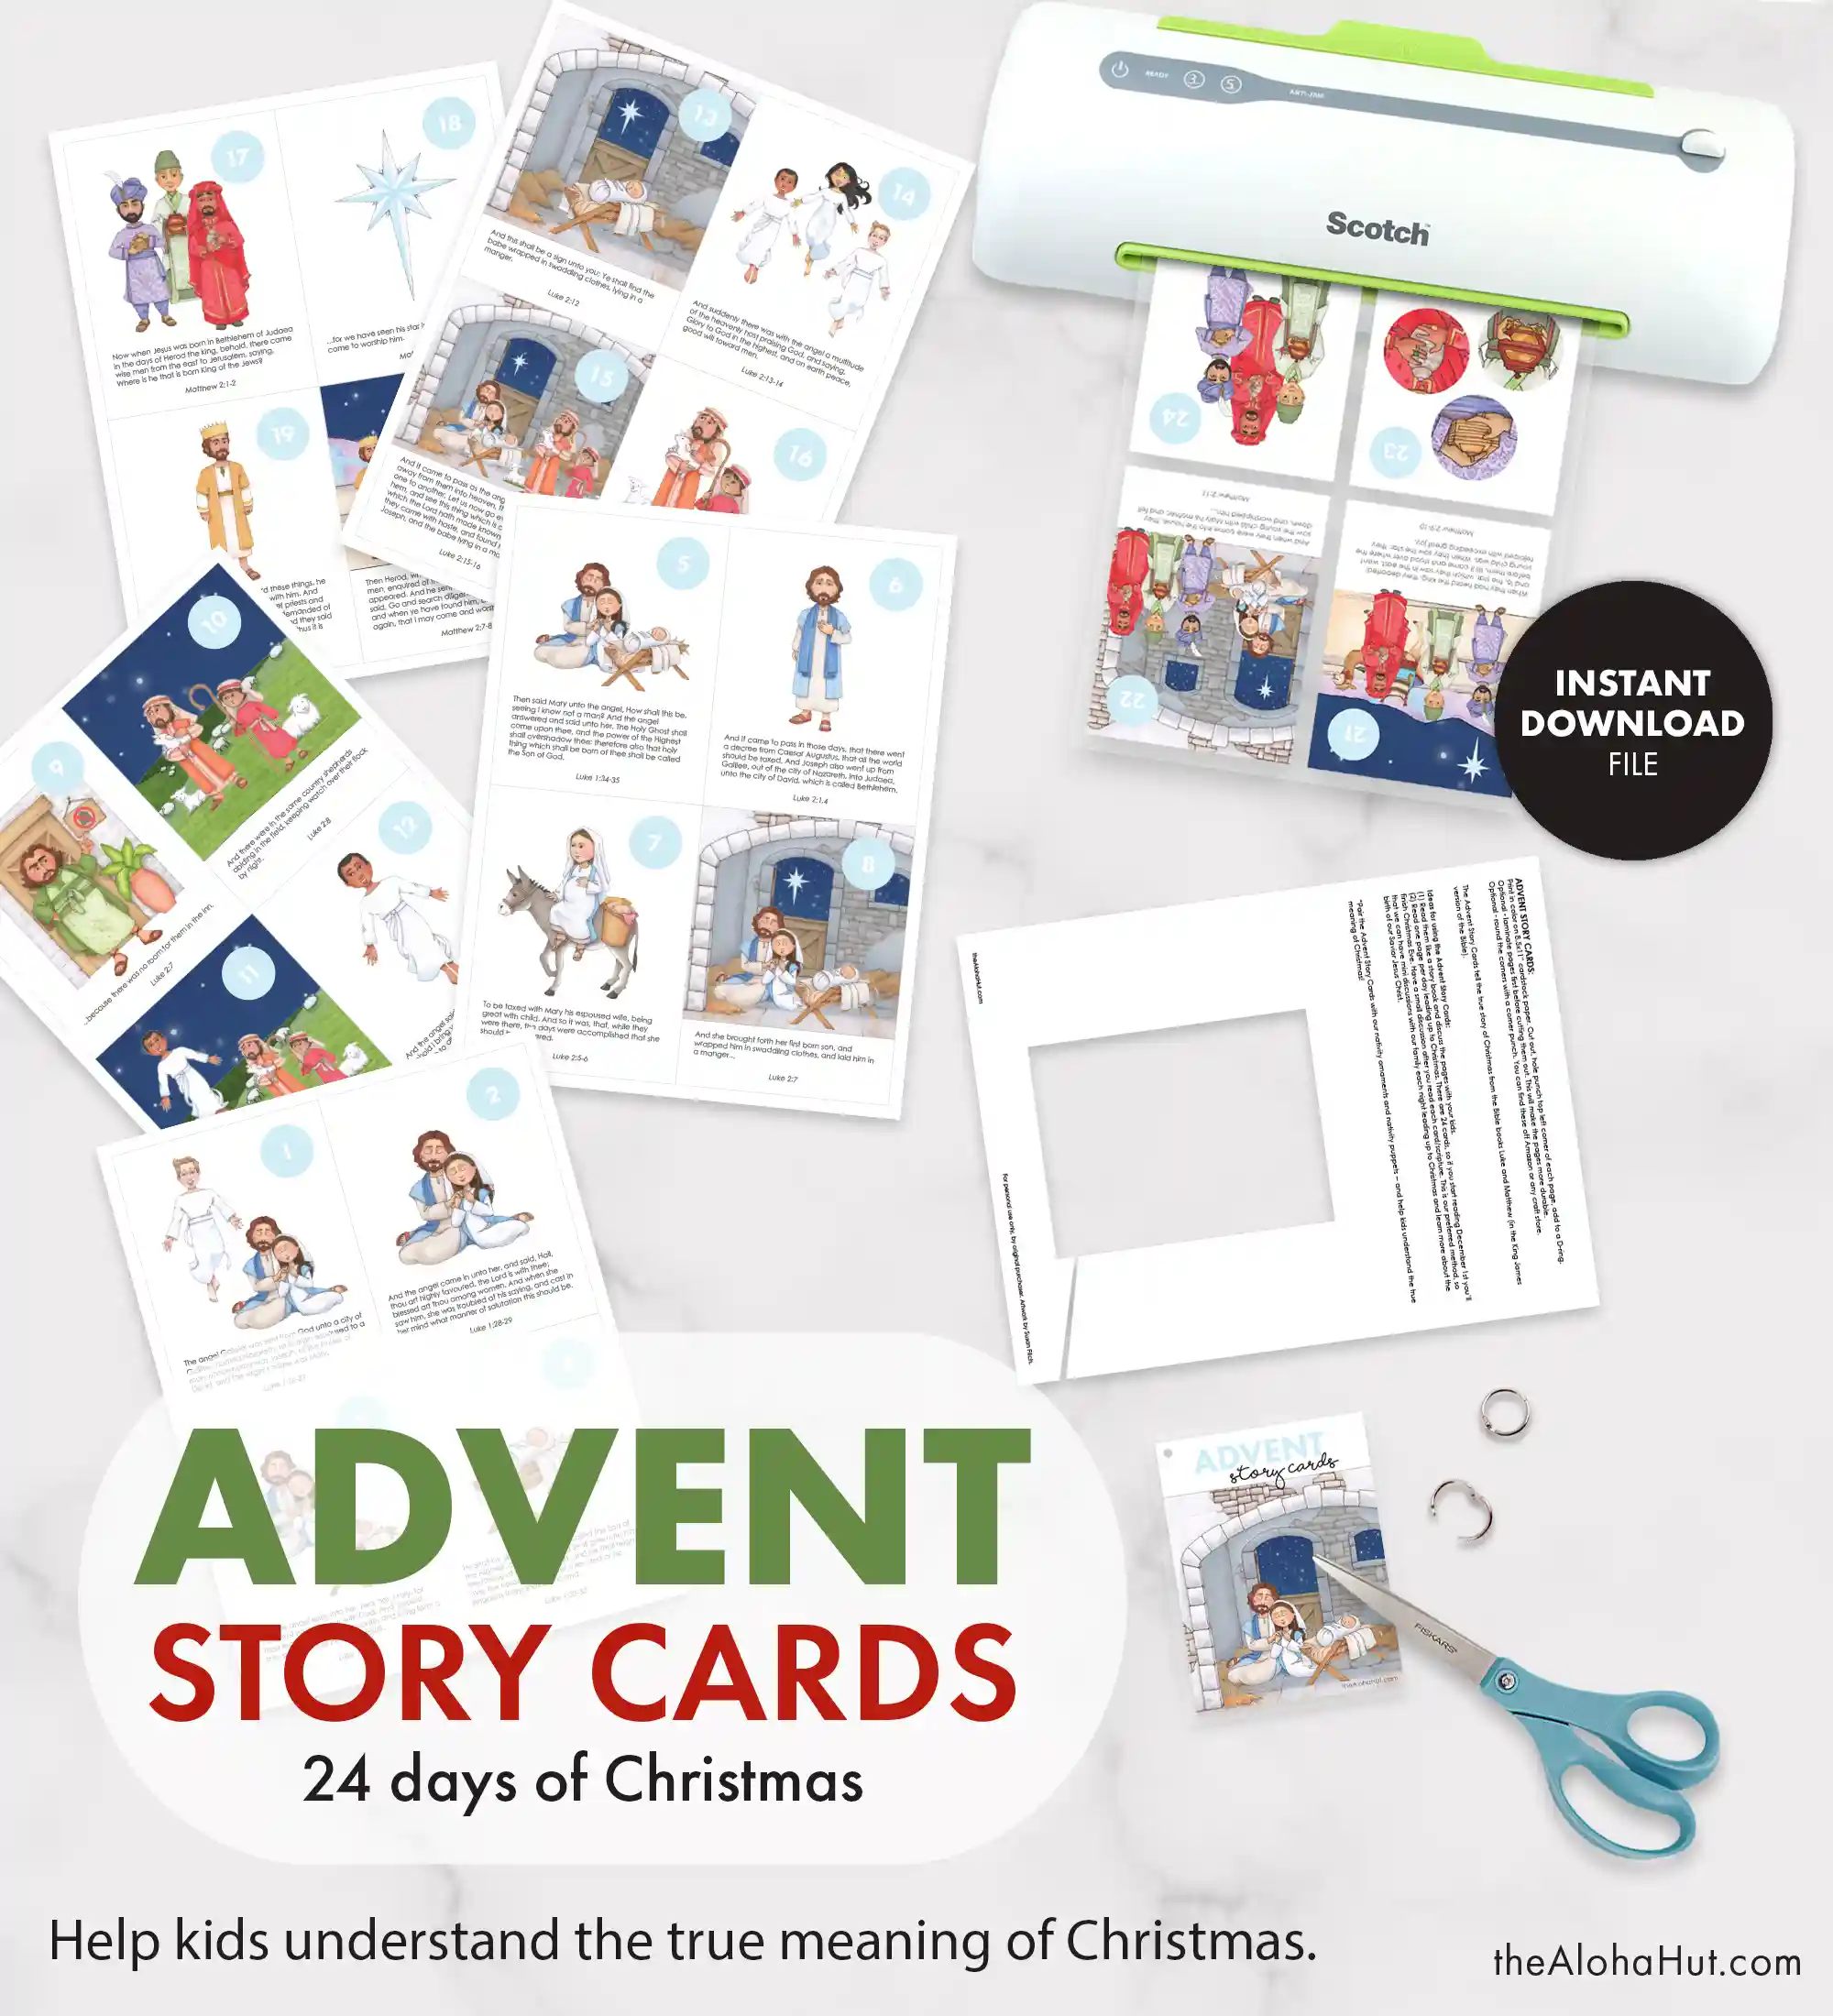 Christmas advent story cards. Download the printable advent story cards that have 25 pages about the birth of Jesus Christ. Print and teach kids the story of Jesus each day in December leading up to Christmas for a fun and easy nativity advent.